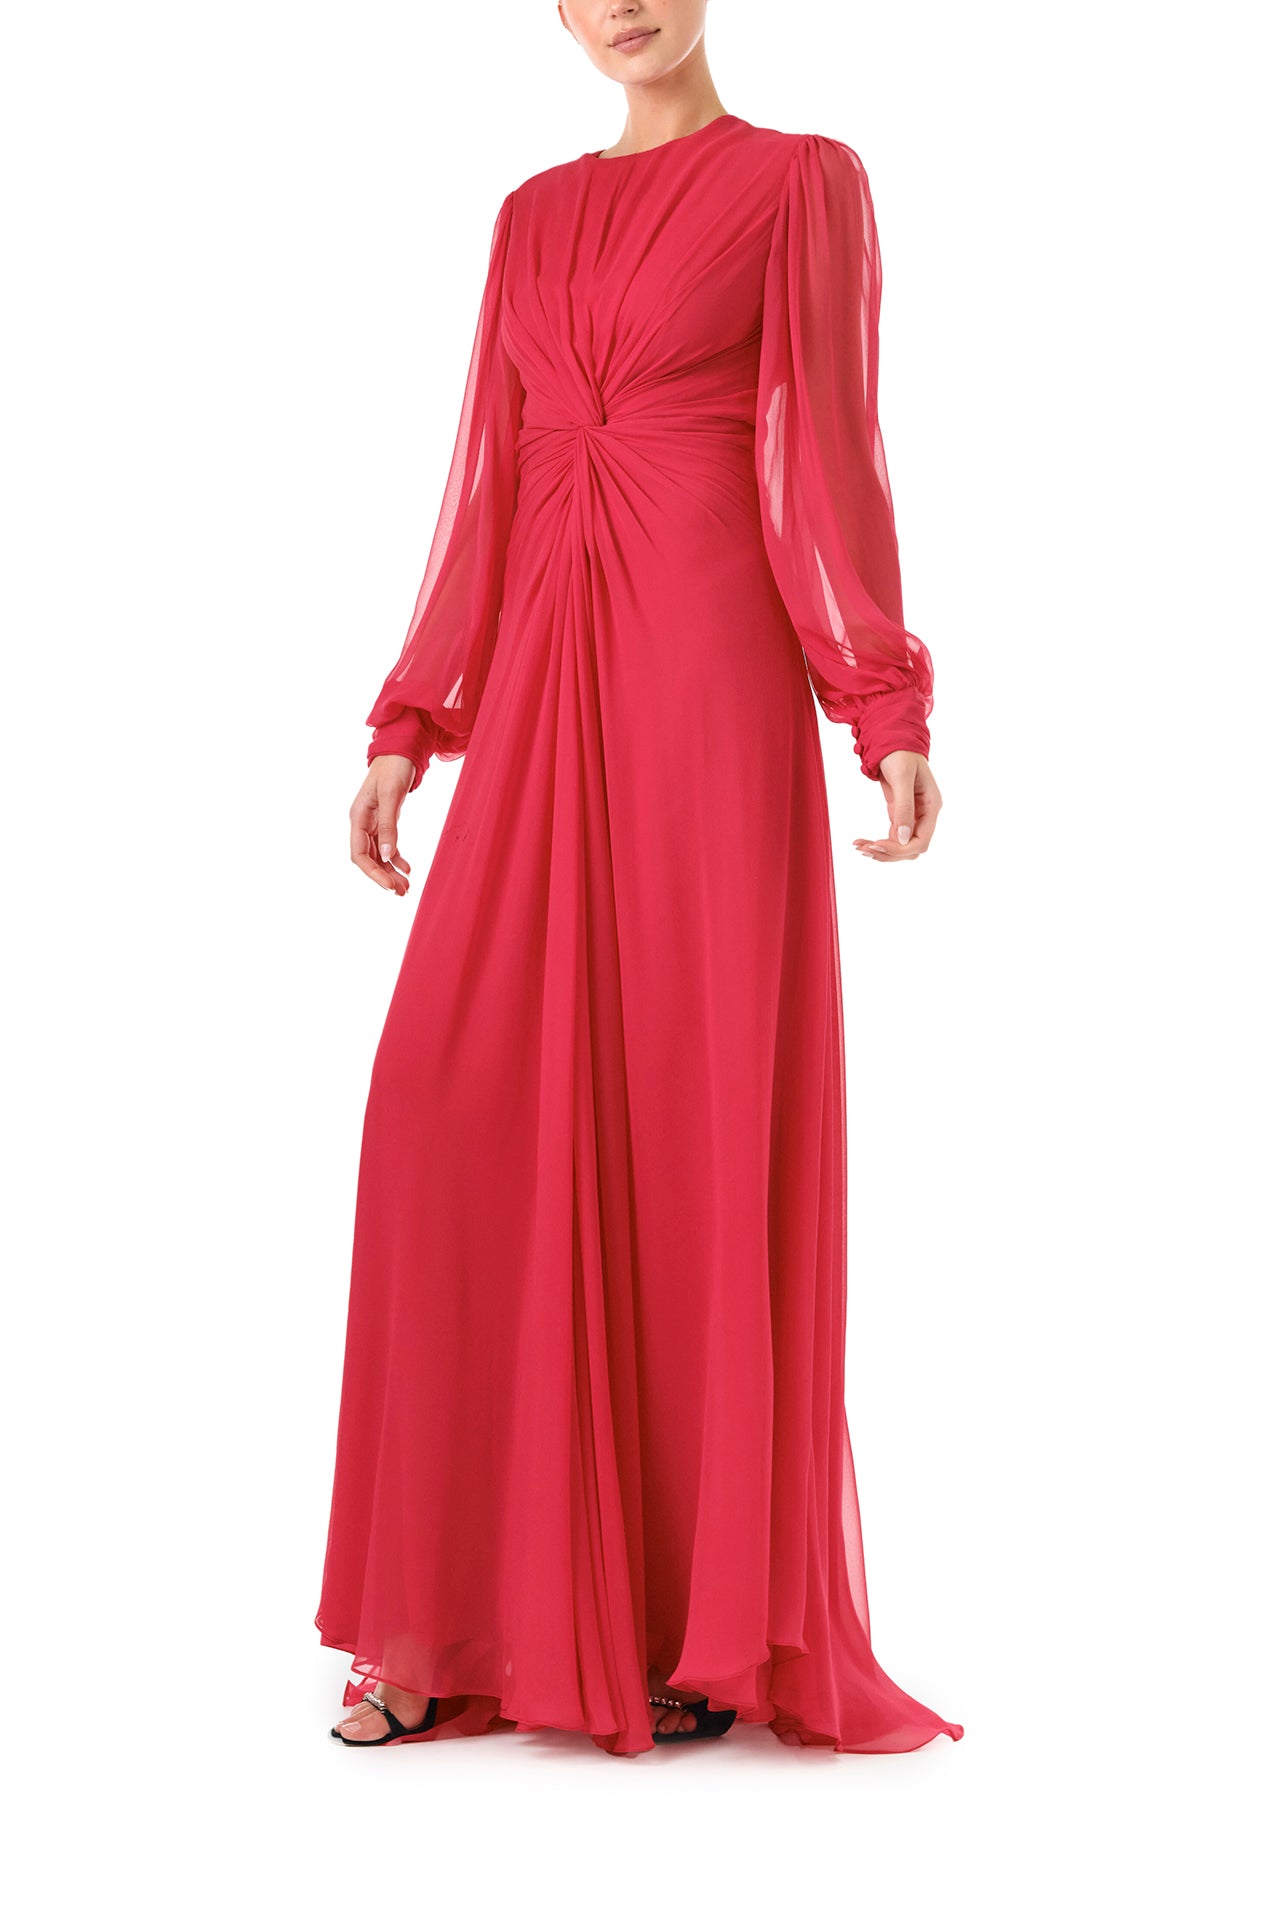 Monique Lhuillier Fall 2024 pomegranate chiffon, long sleeve gown with twist front detail, keyhole back and semi-sheer sleeves - side.